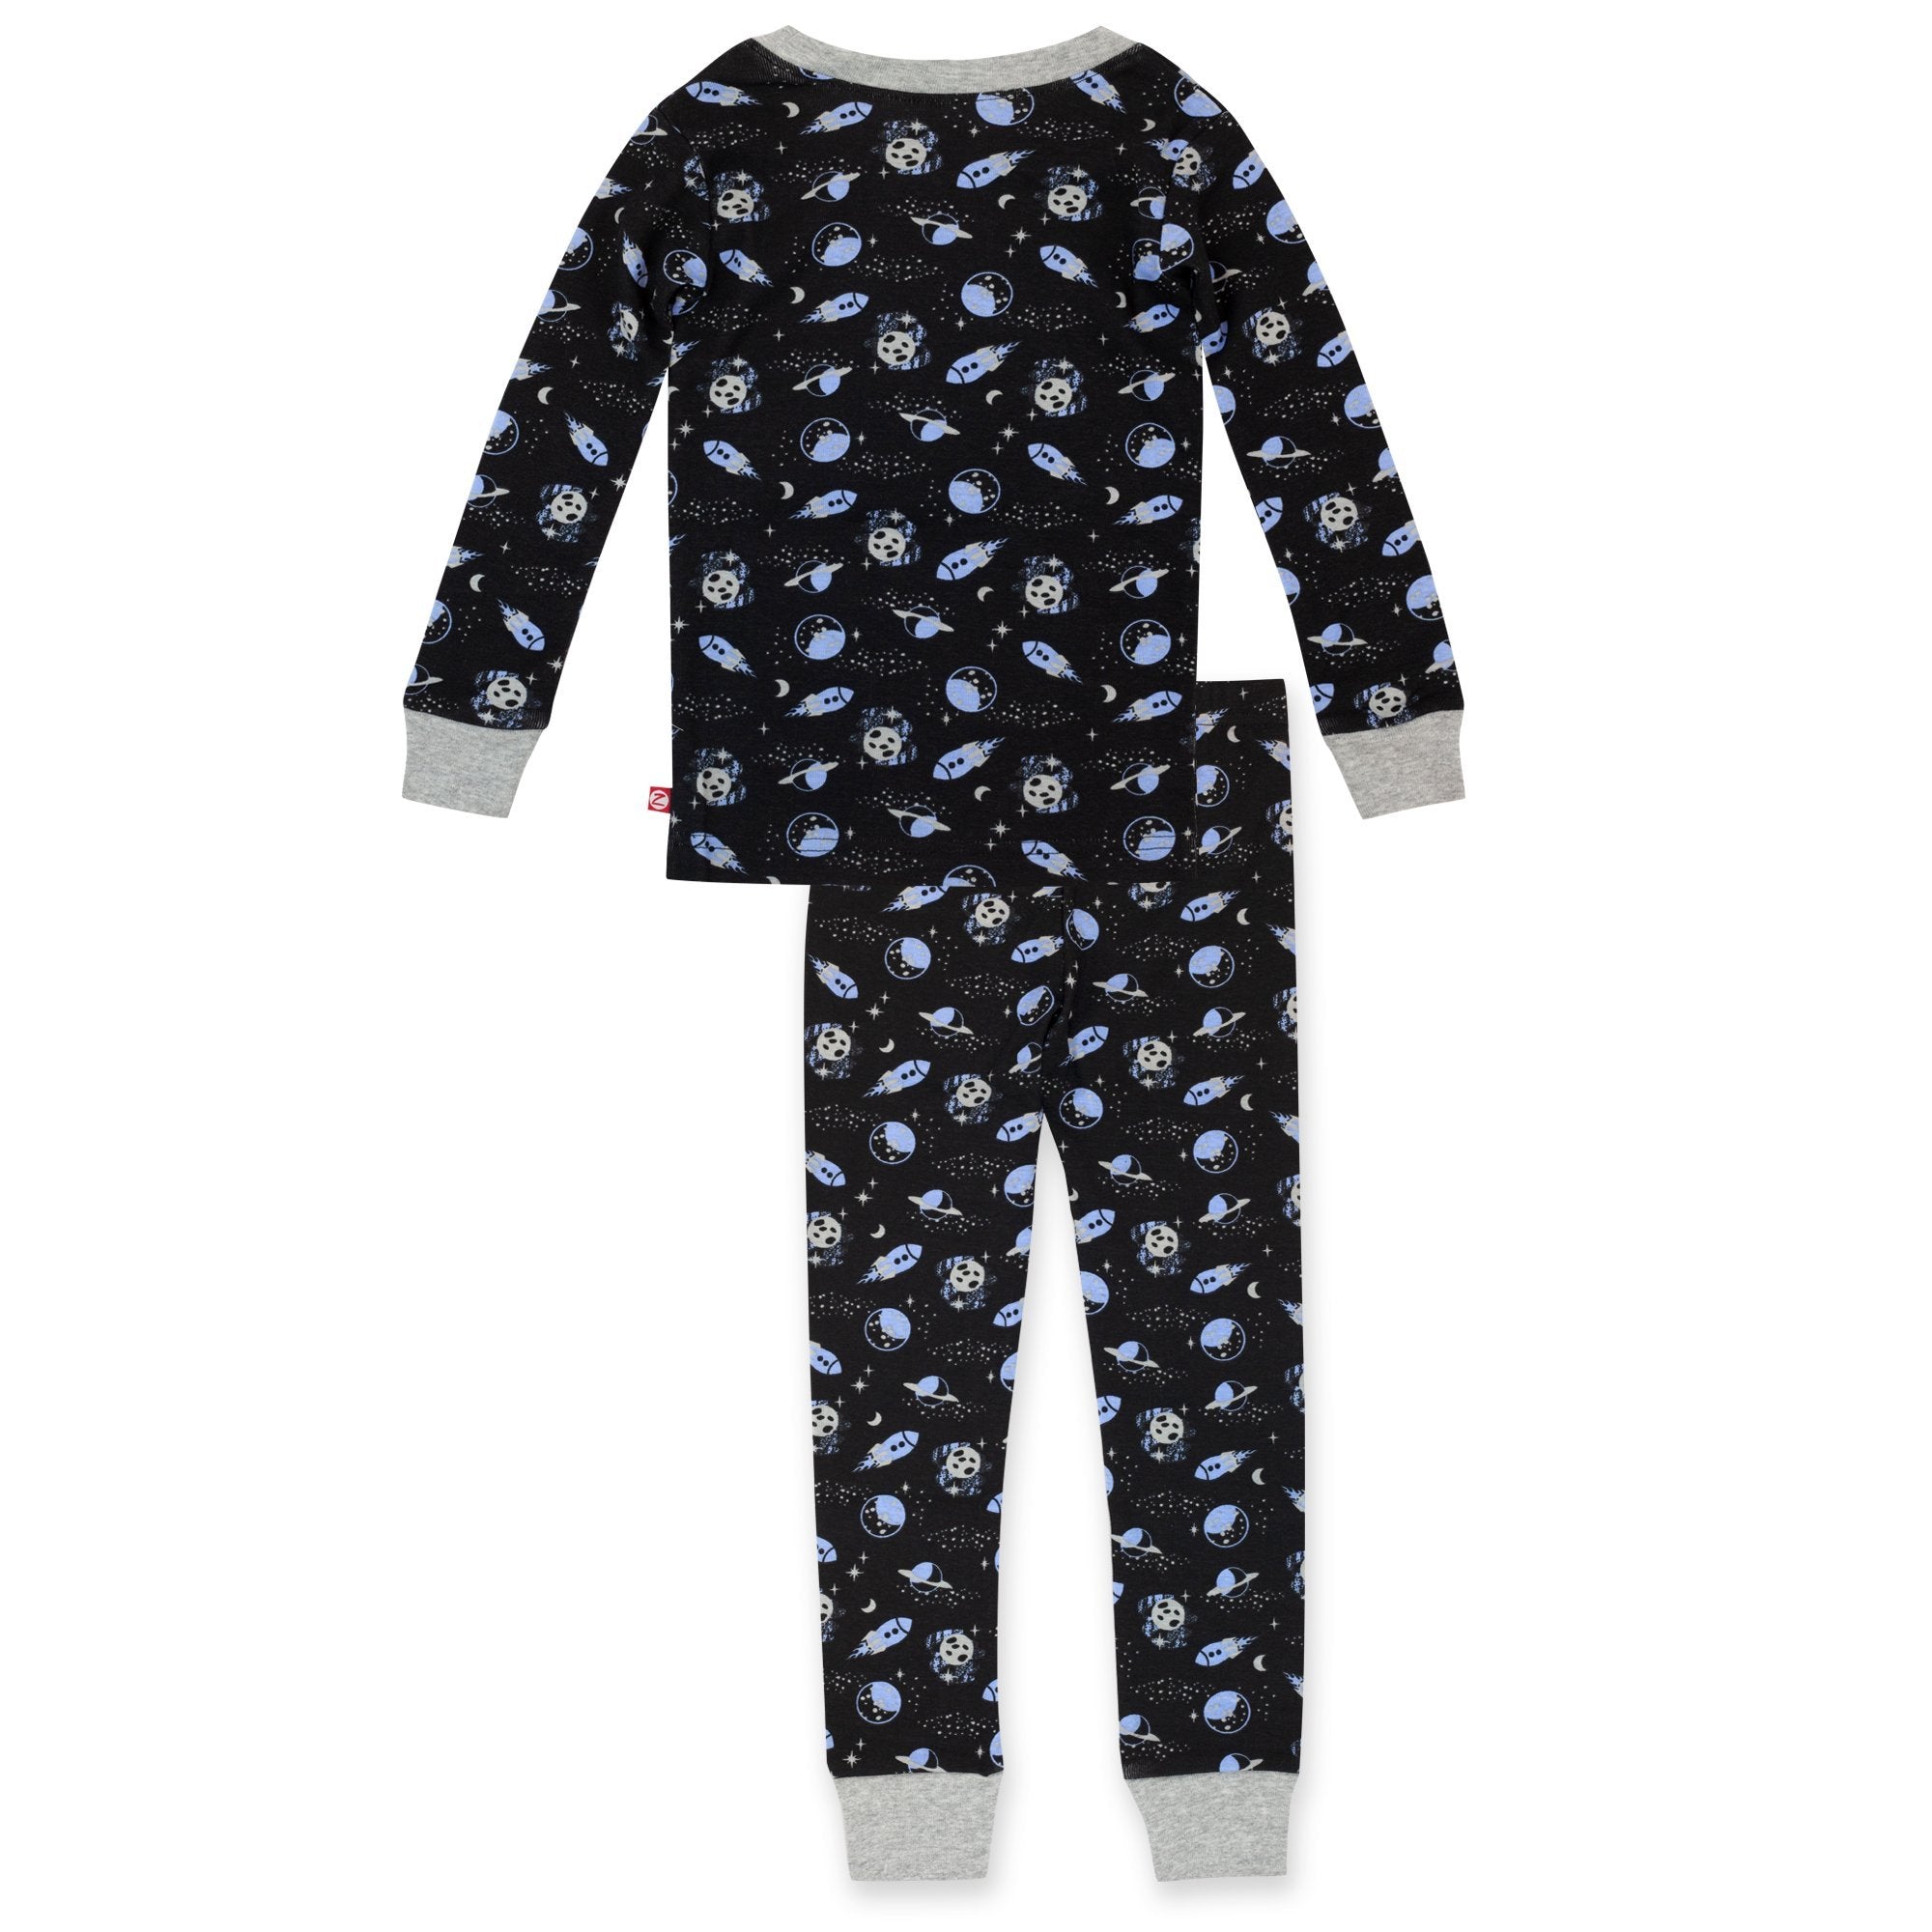 Lost In Space Organic Cotton Pajama Set